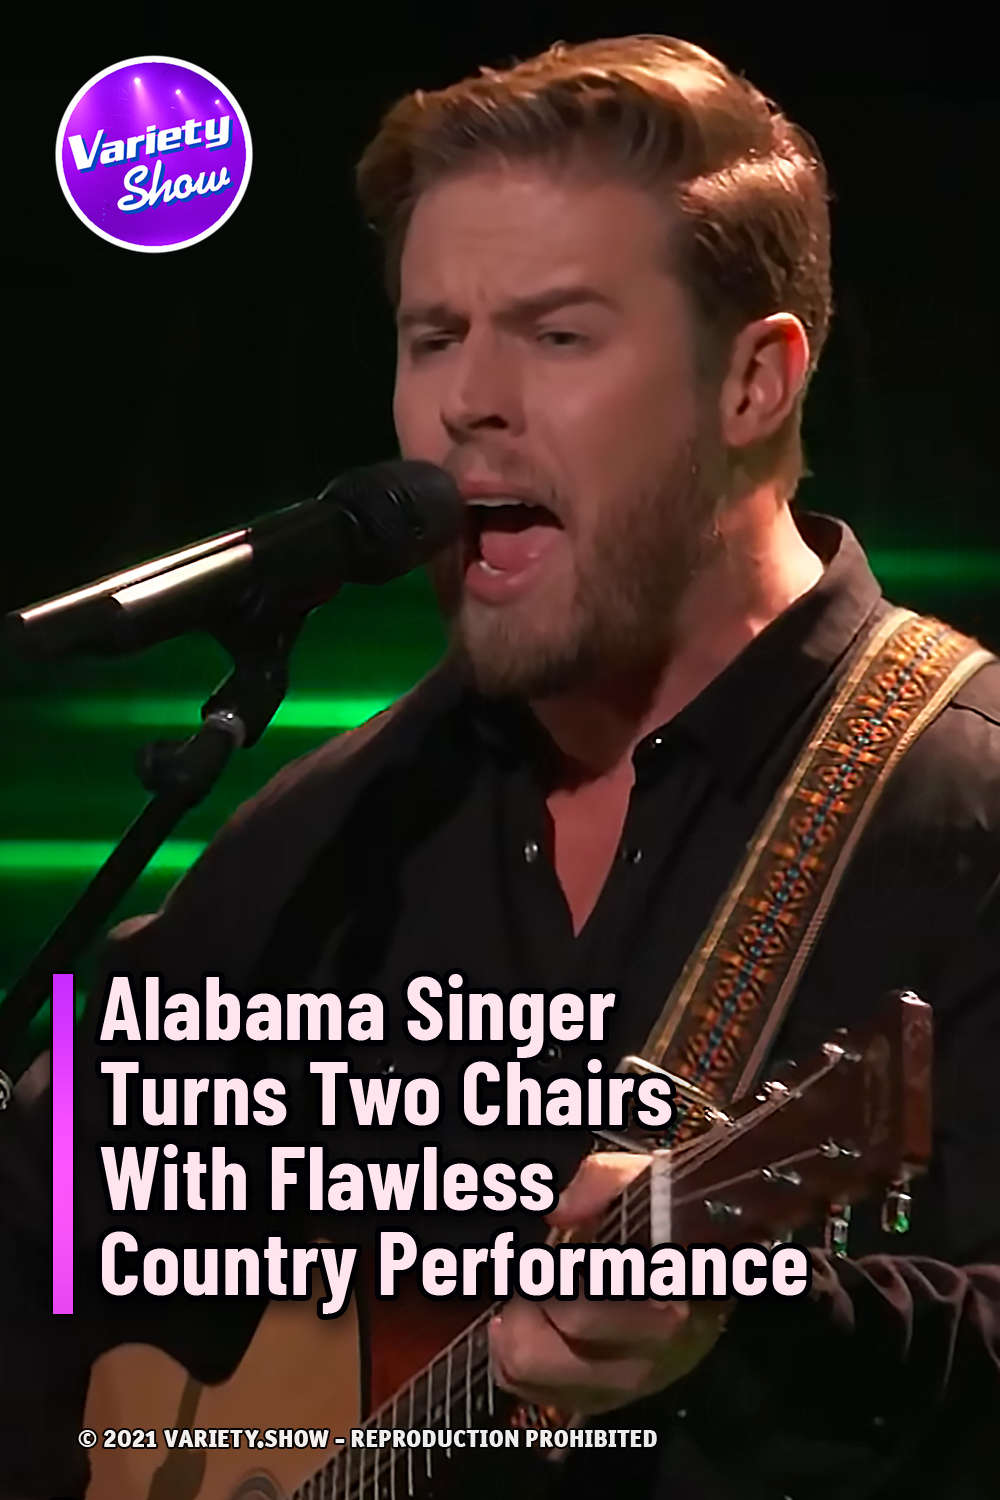 Alabama Singer Turns Two Chairs With Flawless Country Performance